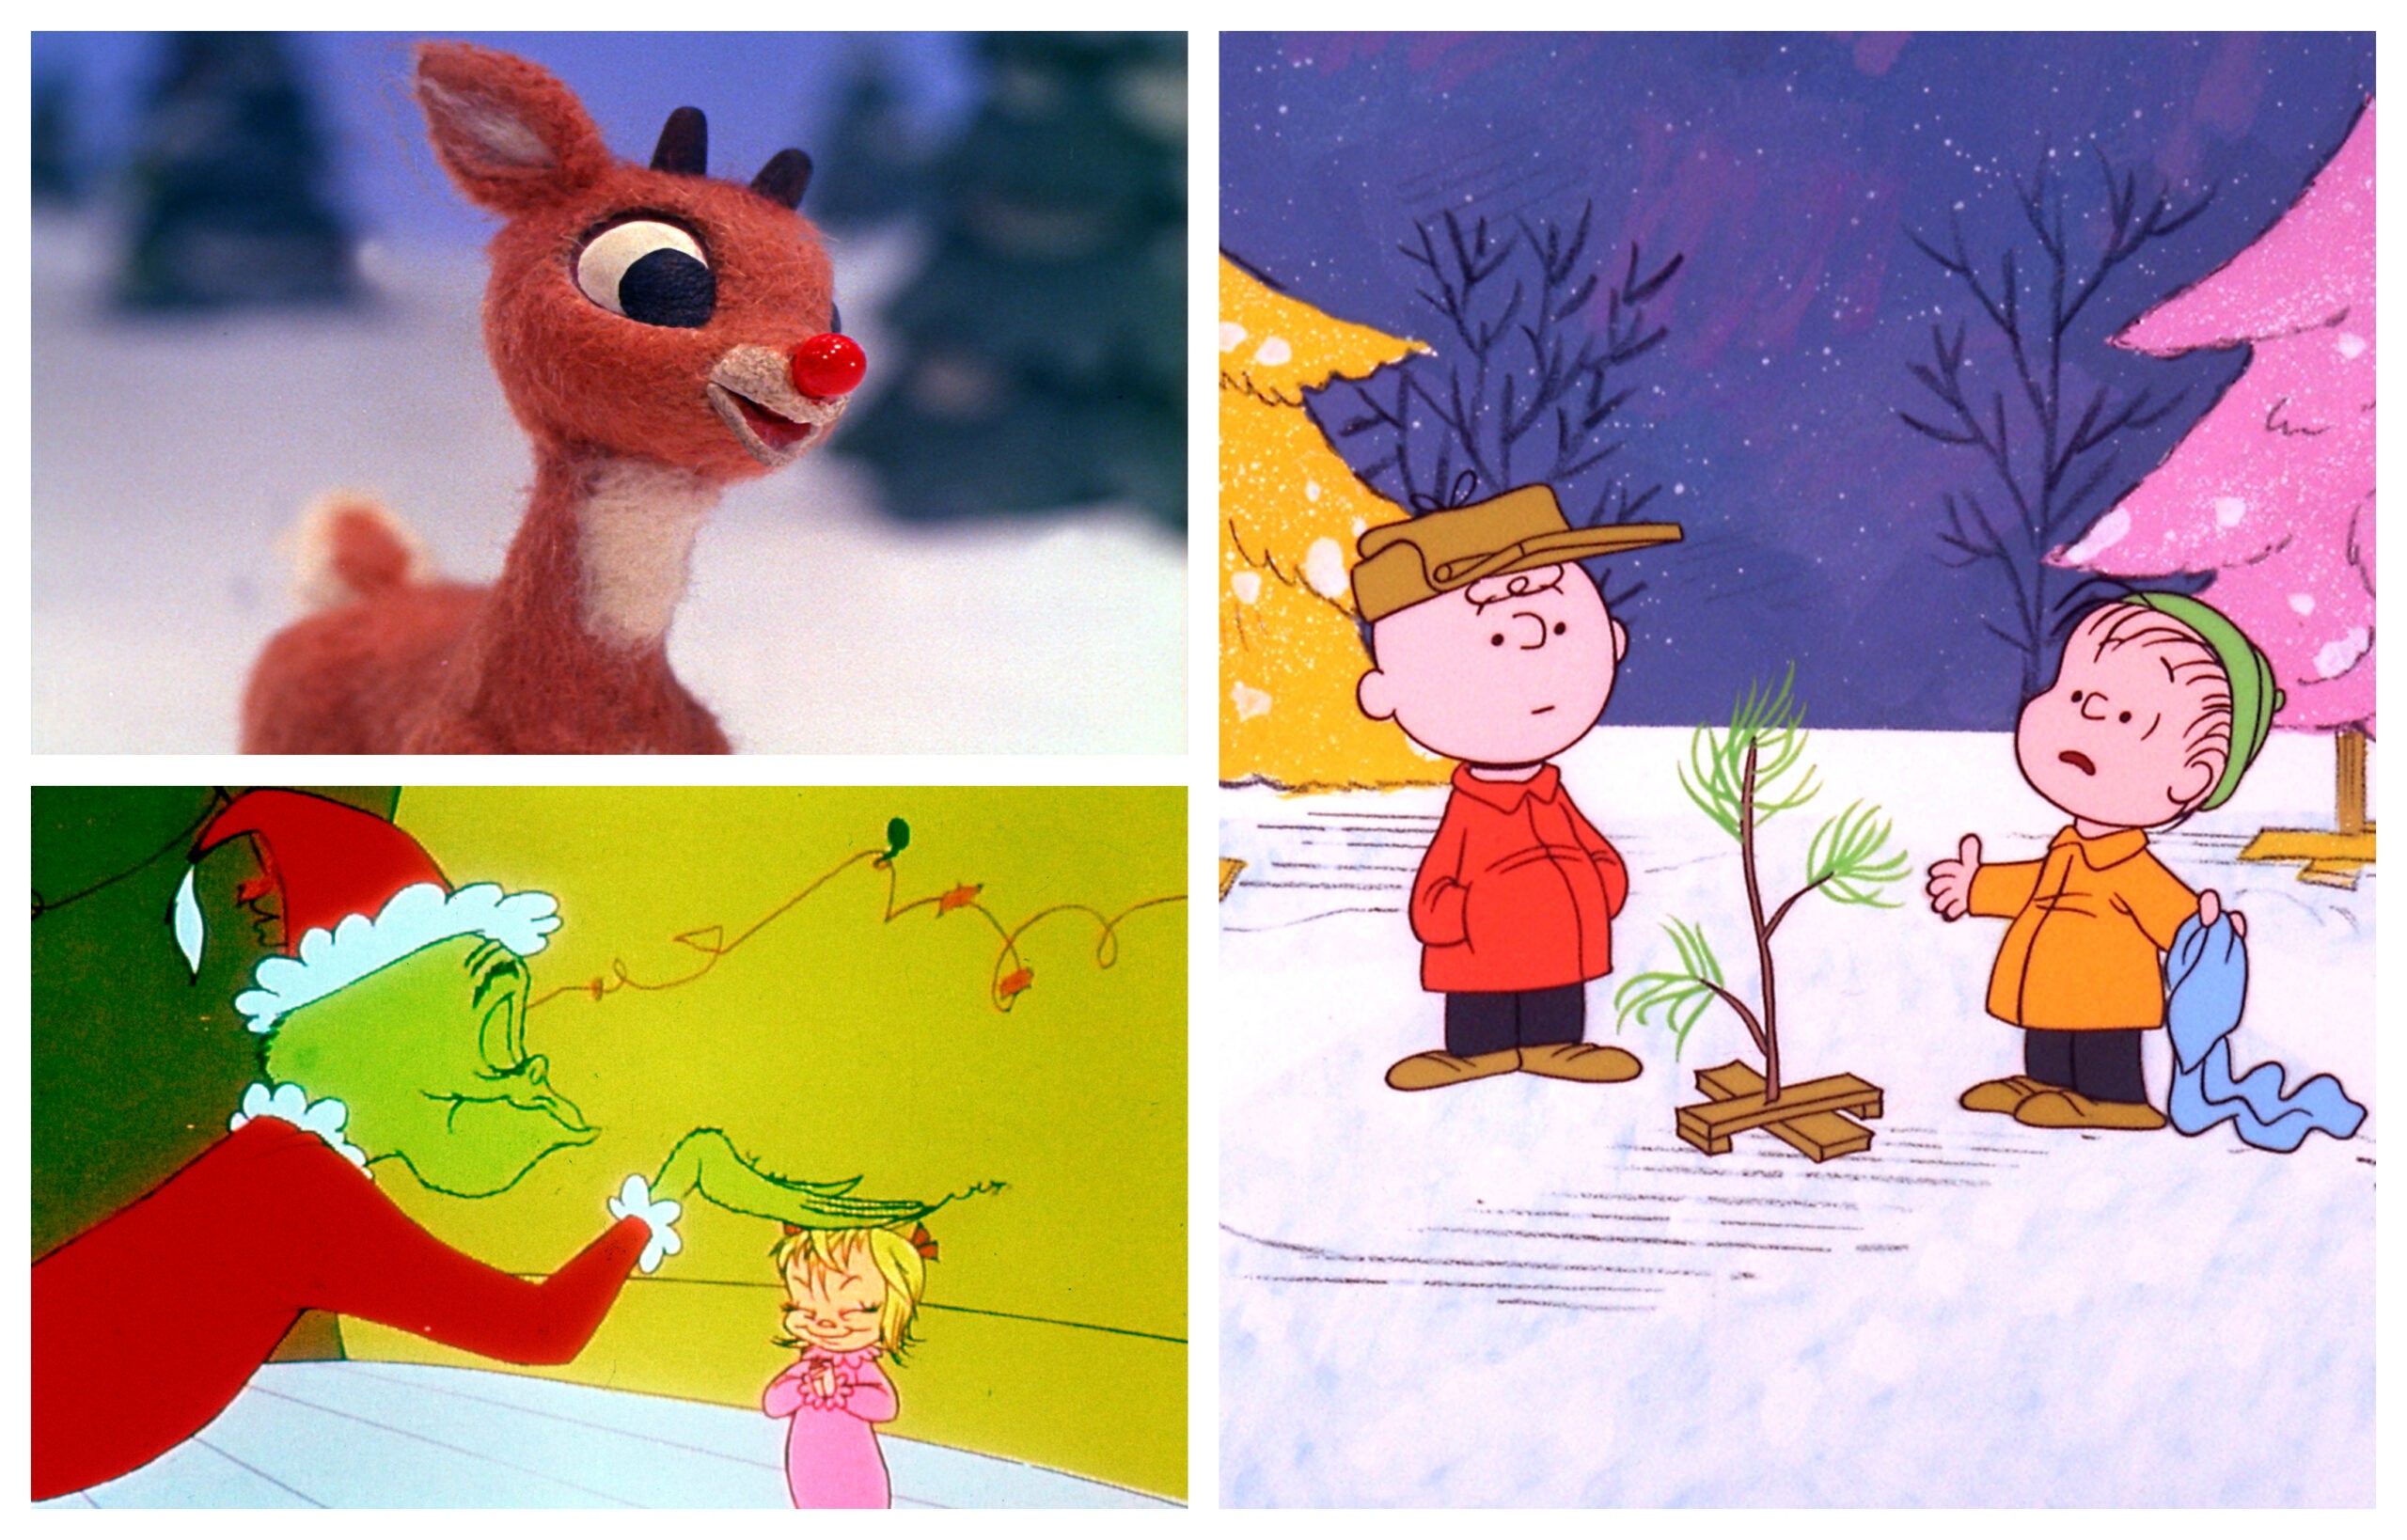 "Rudolph the Red-Nosed Reindeer," "A Charlie Brown Christmas," and "How the Grinch Stole Christmas" were all among the most popular holiday specials with Boston.com readers.